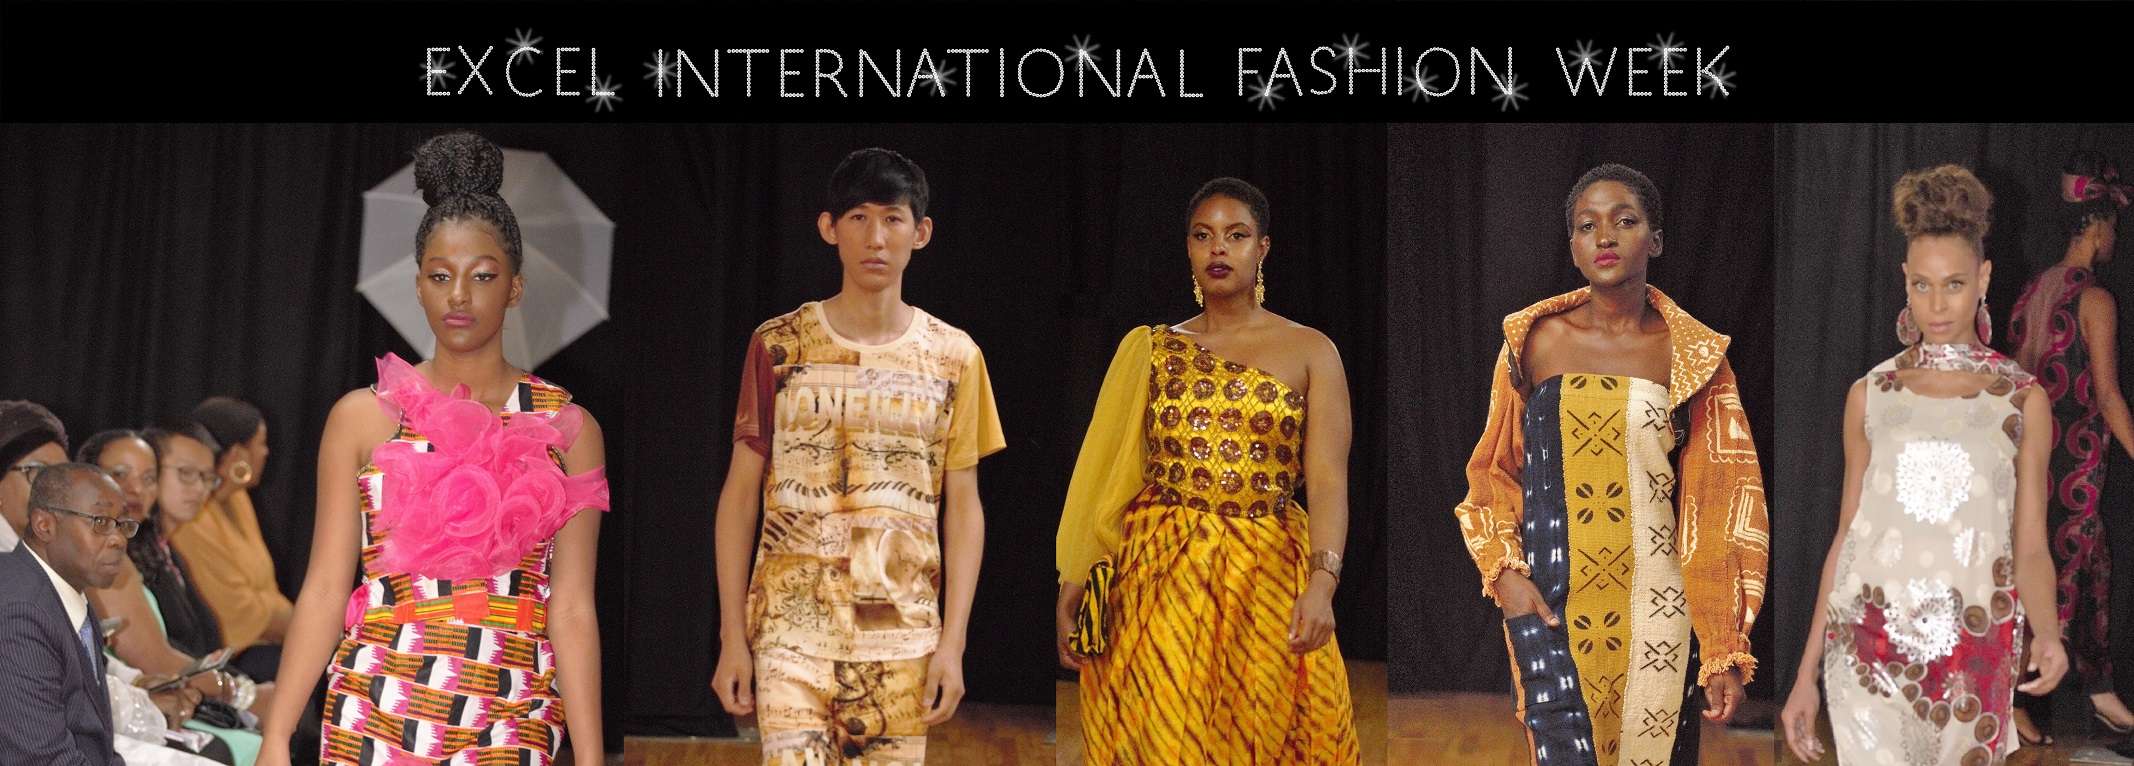 New York City embraced culture during Excel International Fashion Week New York